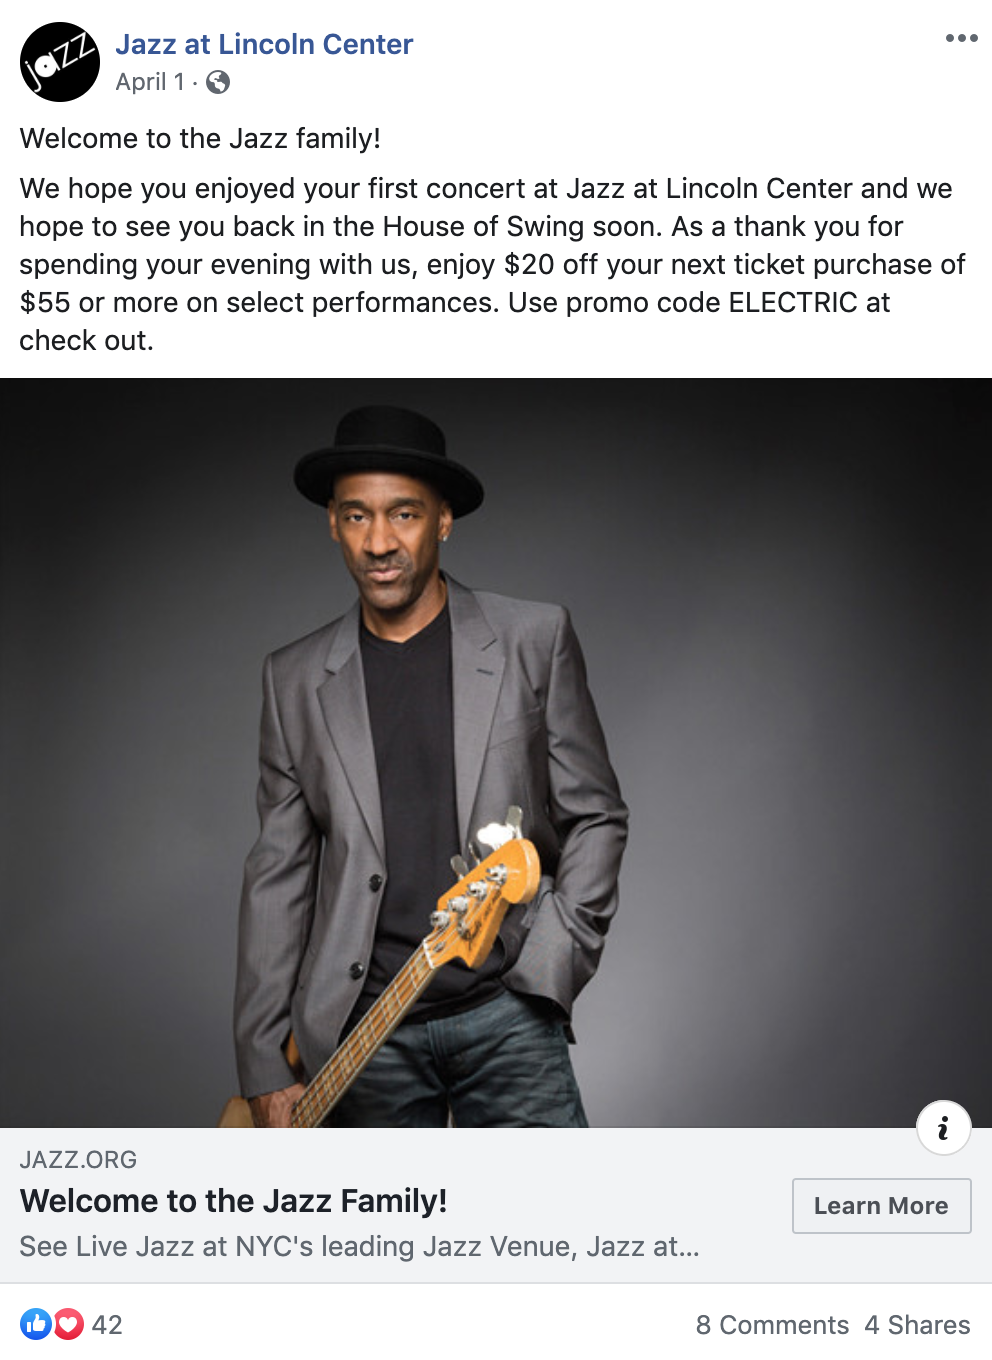 Jazz at Lincoln Center Facebook post welcoming patrons to the Jazz family after their first concert and thanking patrons with $20 off their next ticket purchase